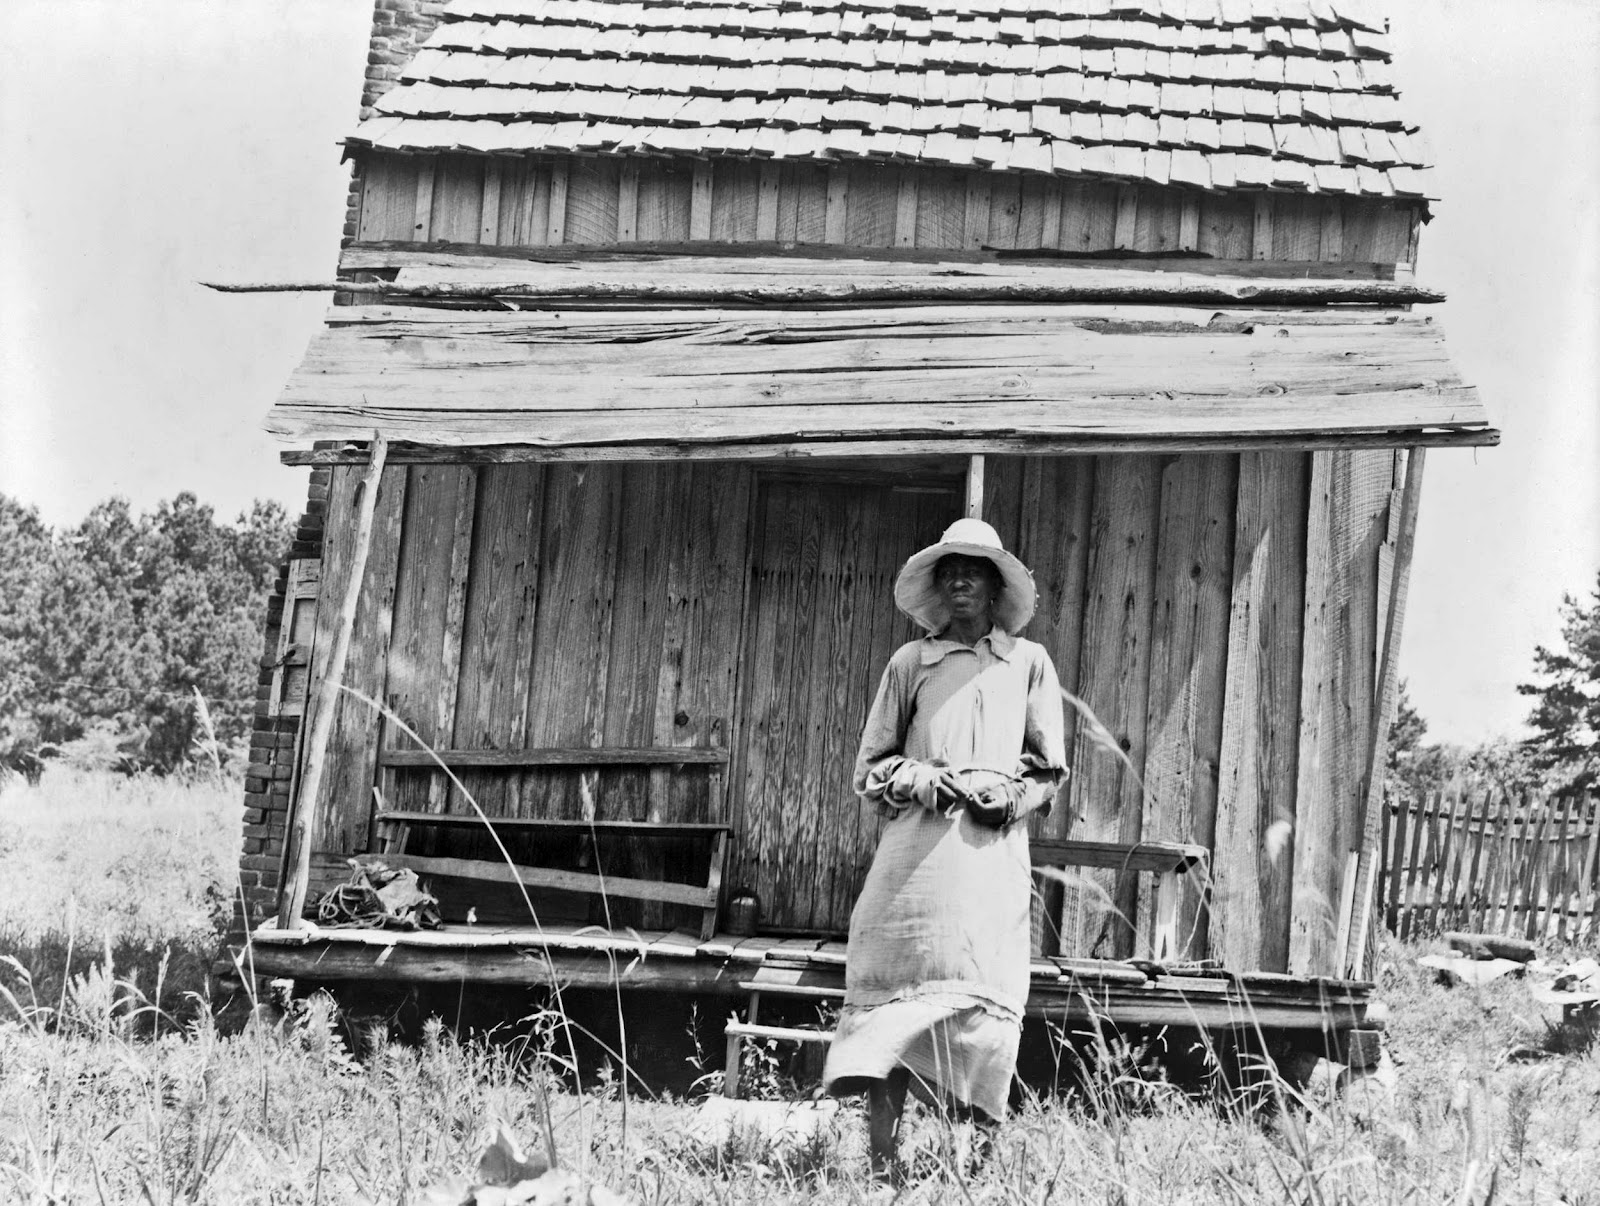 what was sharecropping and how did planters pay sharecroppers for their labor